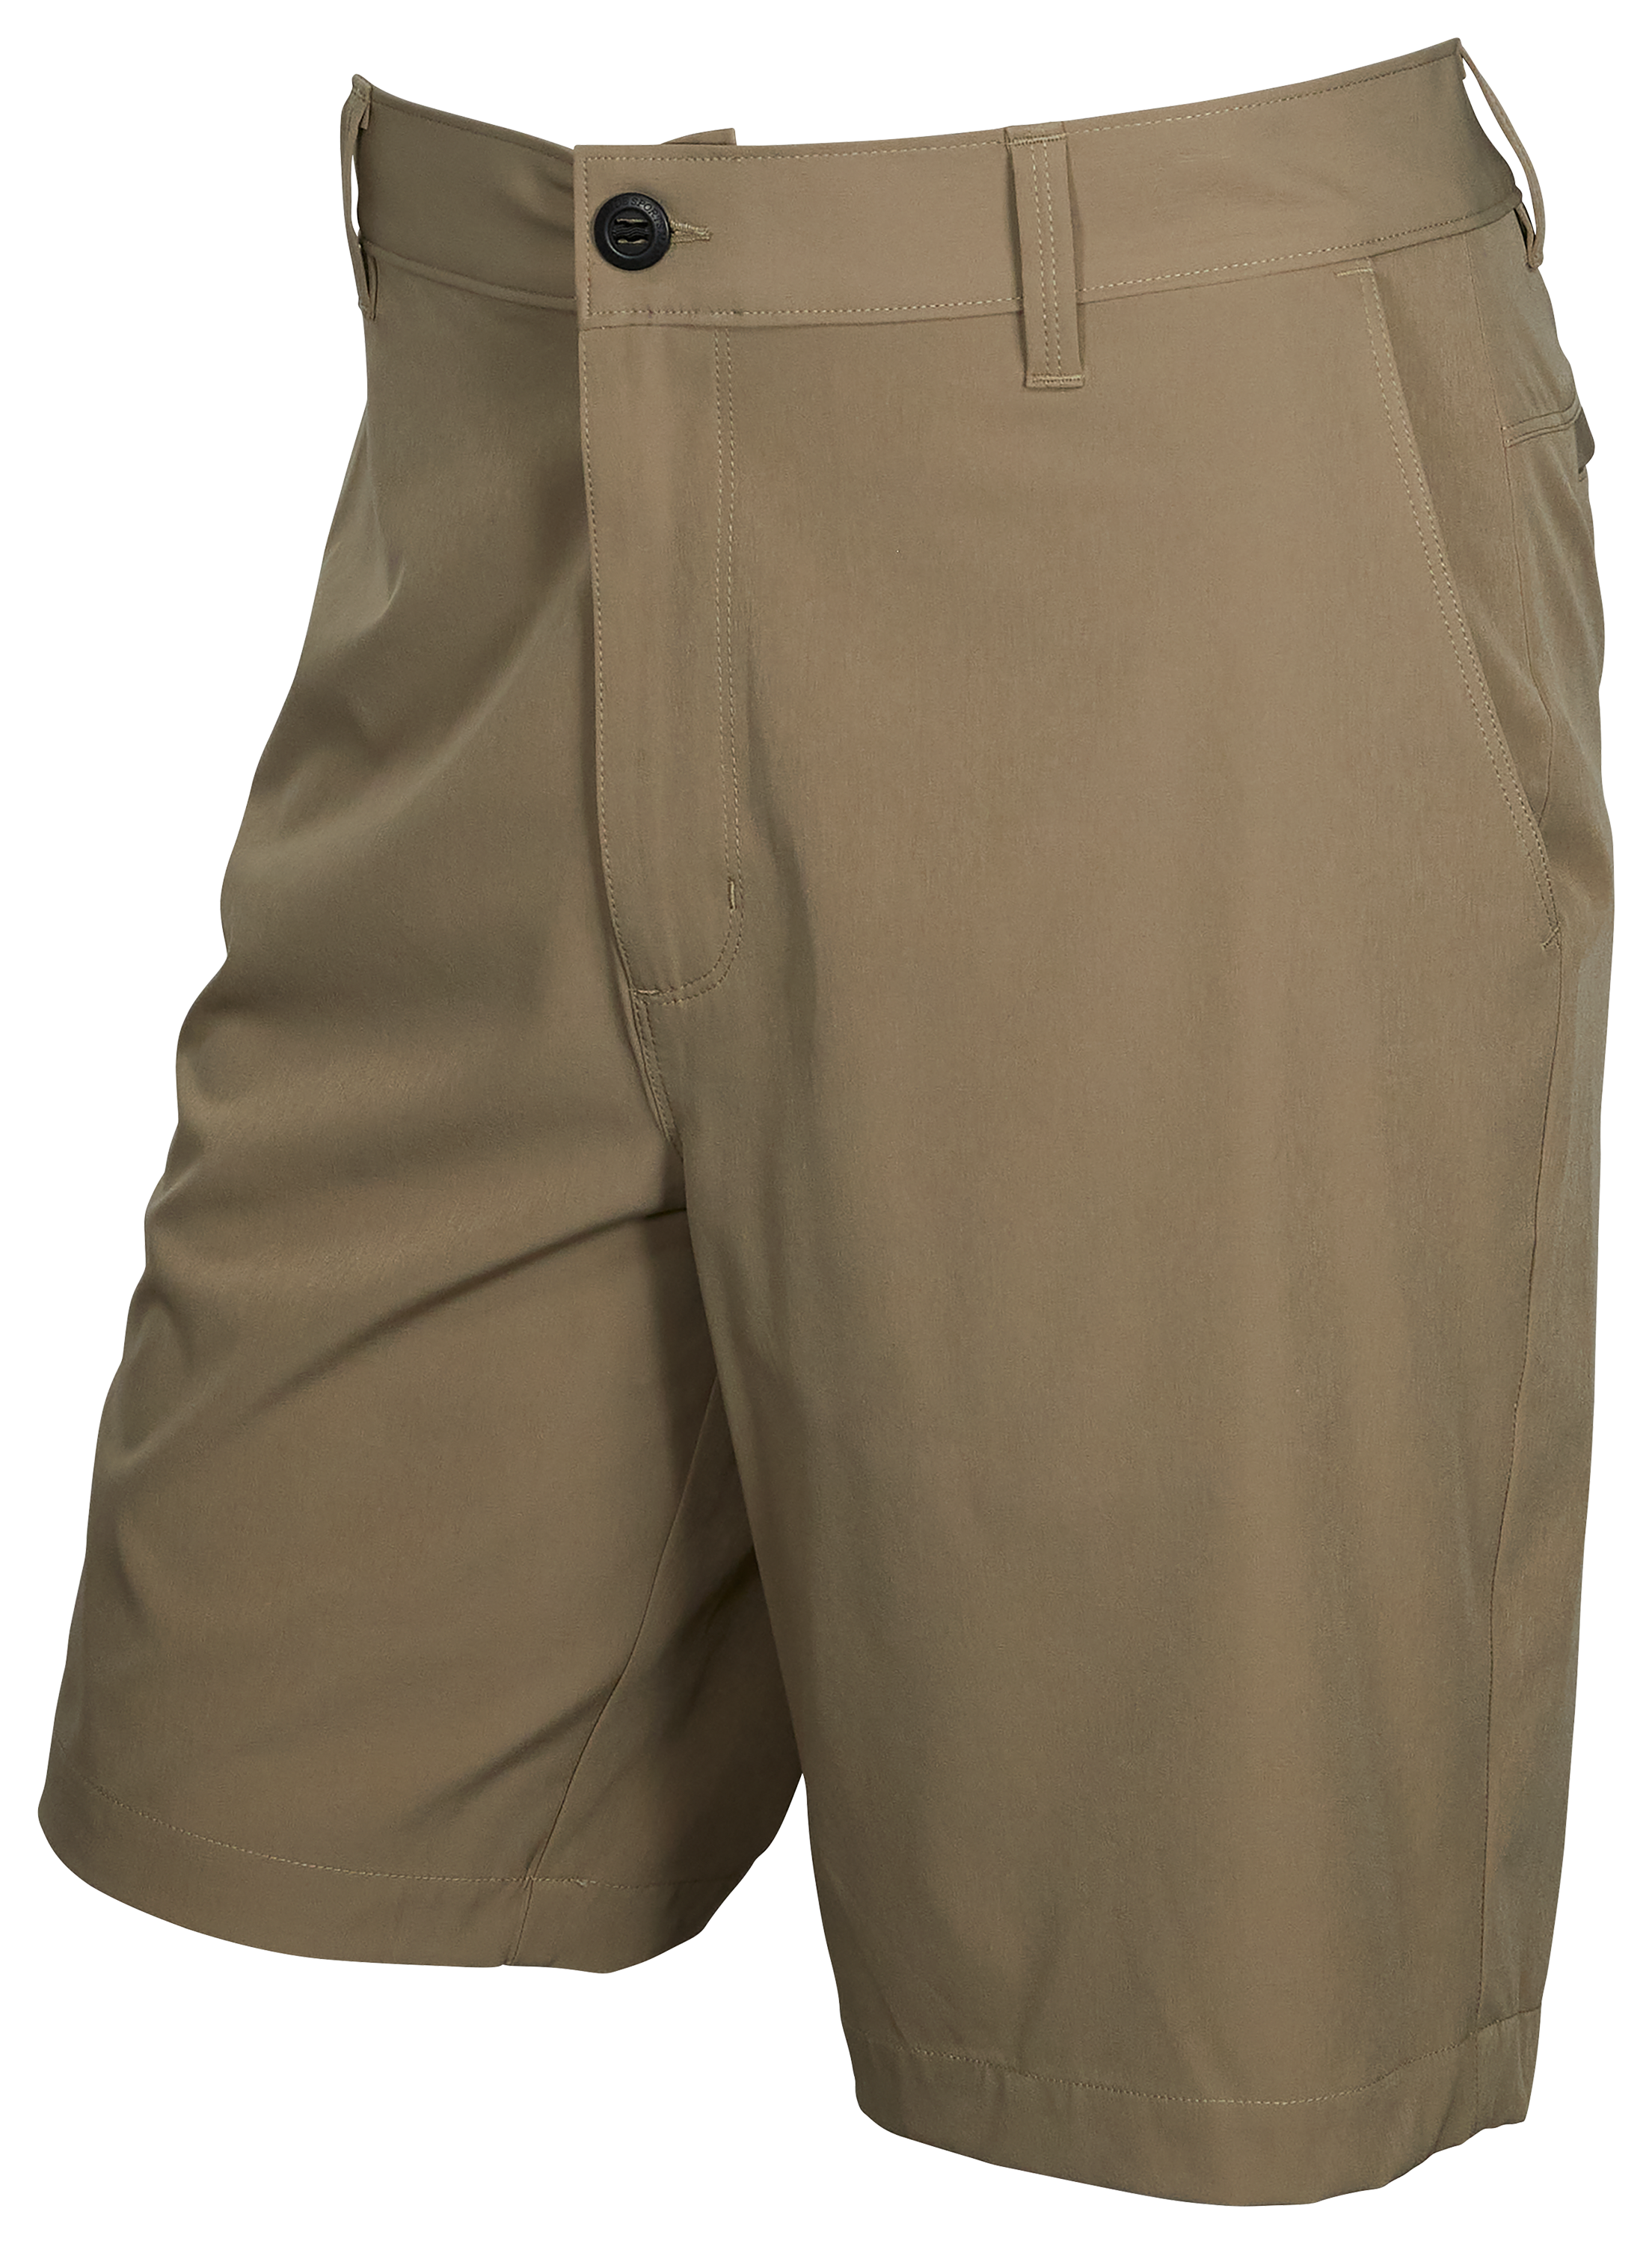 World Wide Sportsman Pescador Stretch Fishing Shorts for Men - Timber - 40